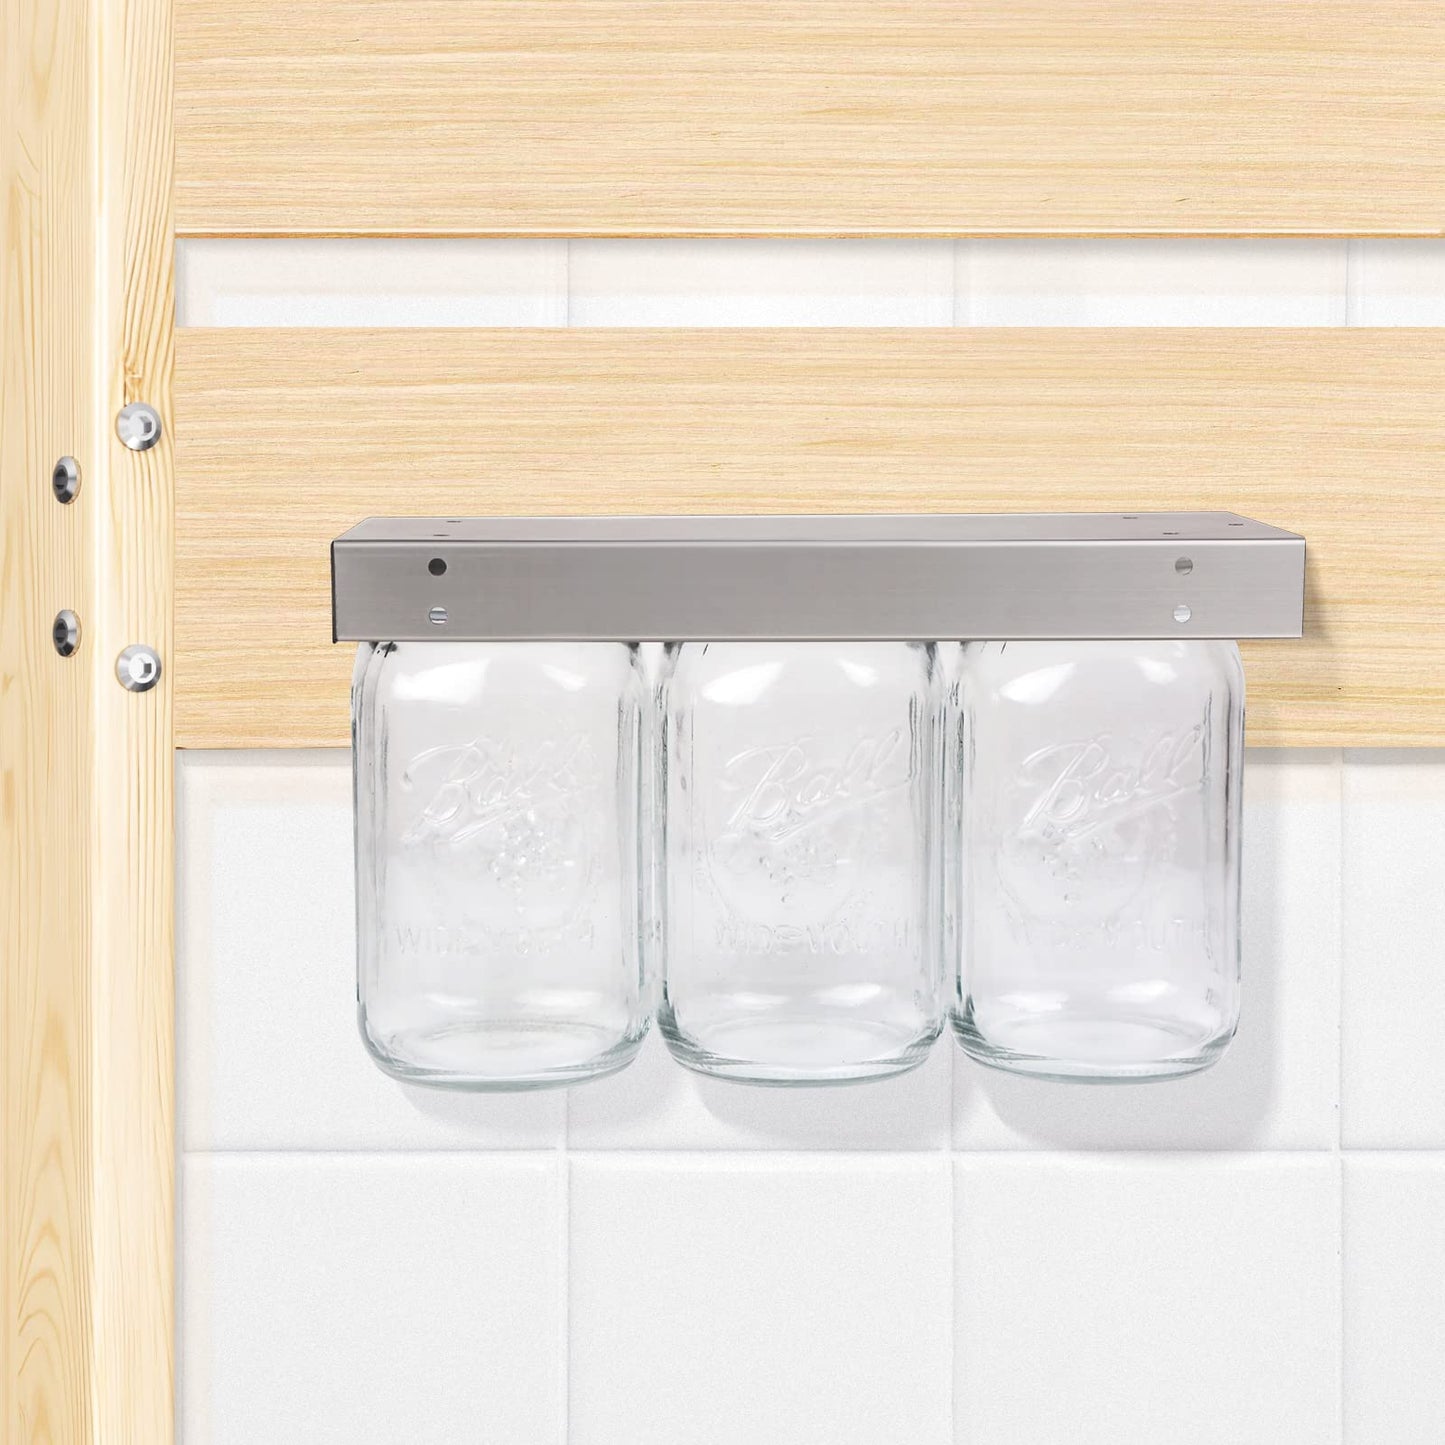 YEEPON mason jar racks, mason jar holders,mason jar holders for hanging,Stainless Steel Holder with 3 Mounting Options for Kitchen, Shelves and Cabinets regular mouth(2Pack)